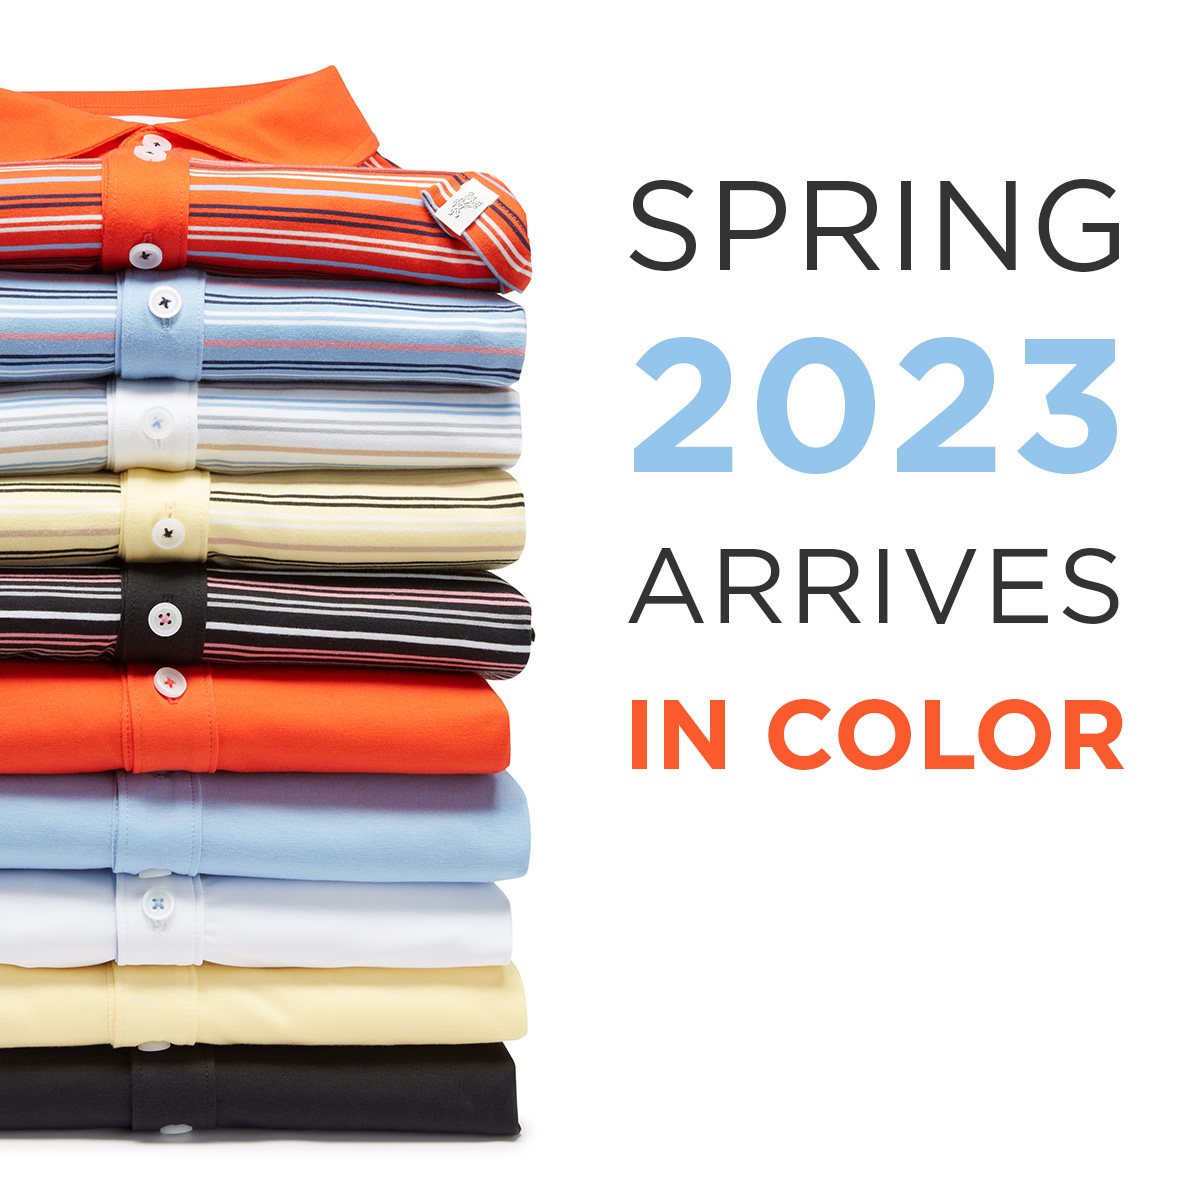 The 2023 Spring Line Up is here! Check out the new colors and styles, ow.ly/Wl8r50MiQMM